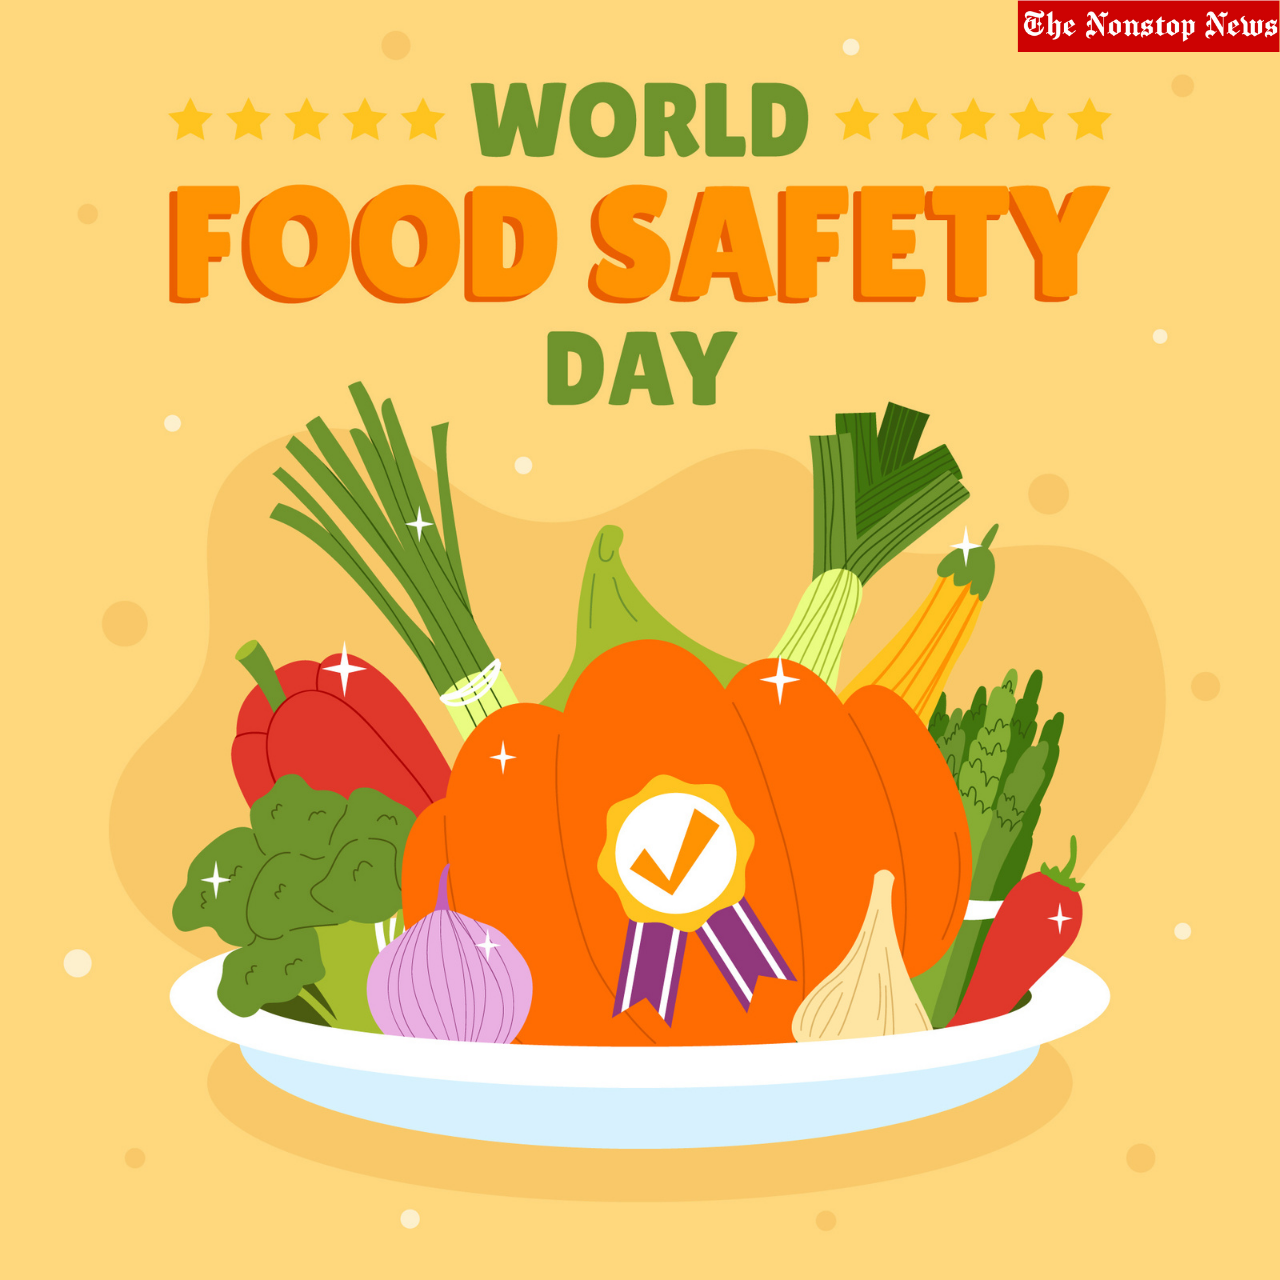 World Food Safety Day 2022: Current Theme, Quotes, Images, Messages, Slogans, Posters, and Banners to create awareness